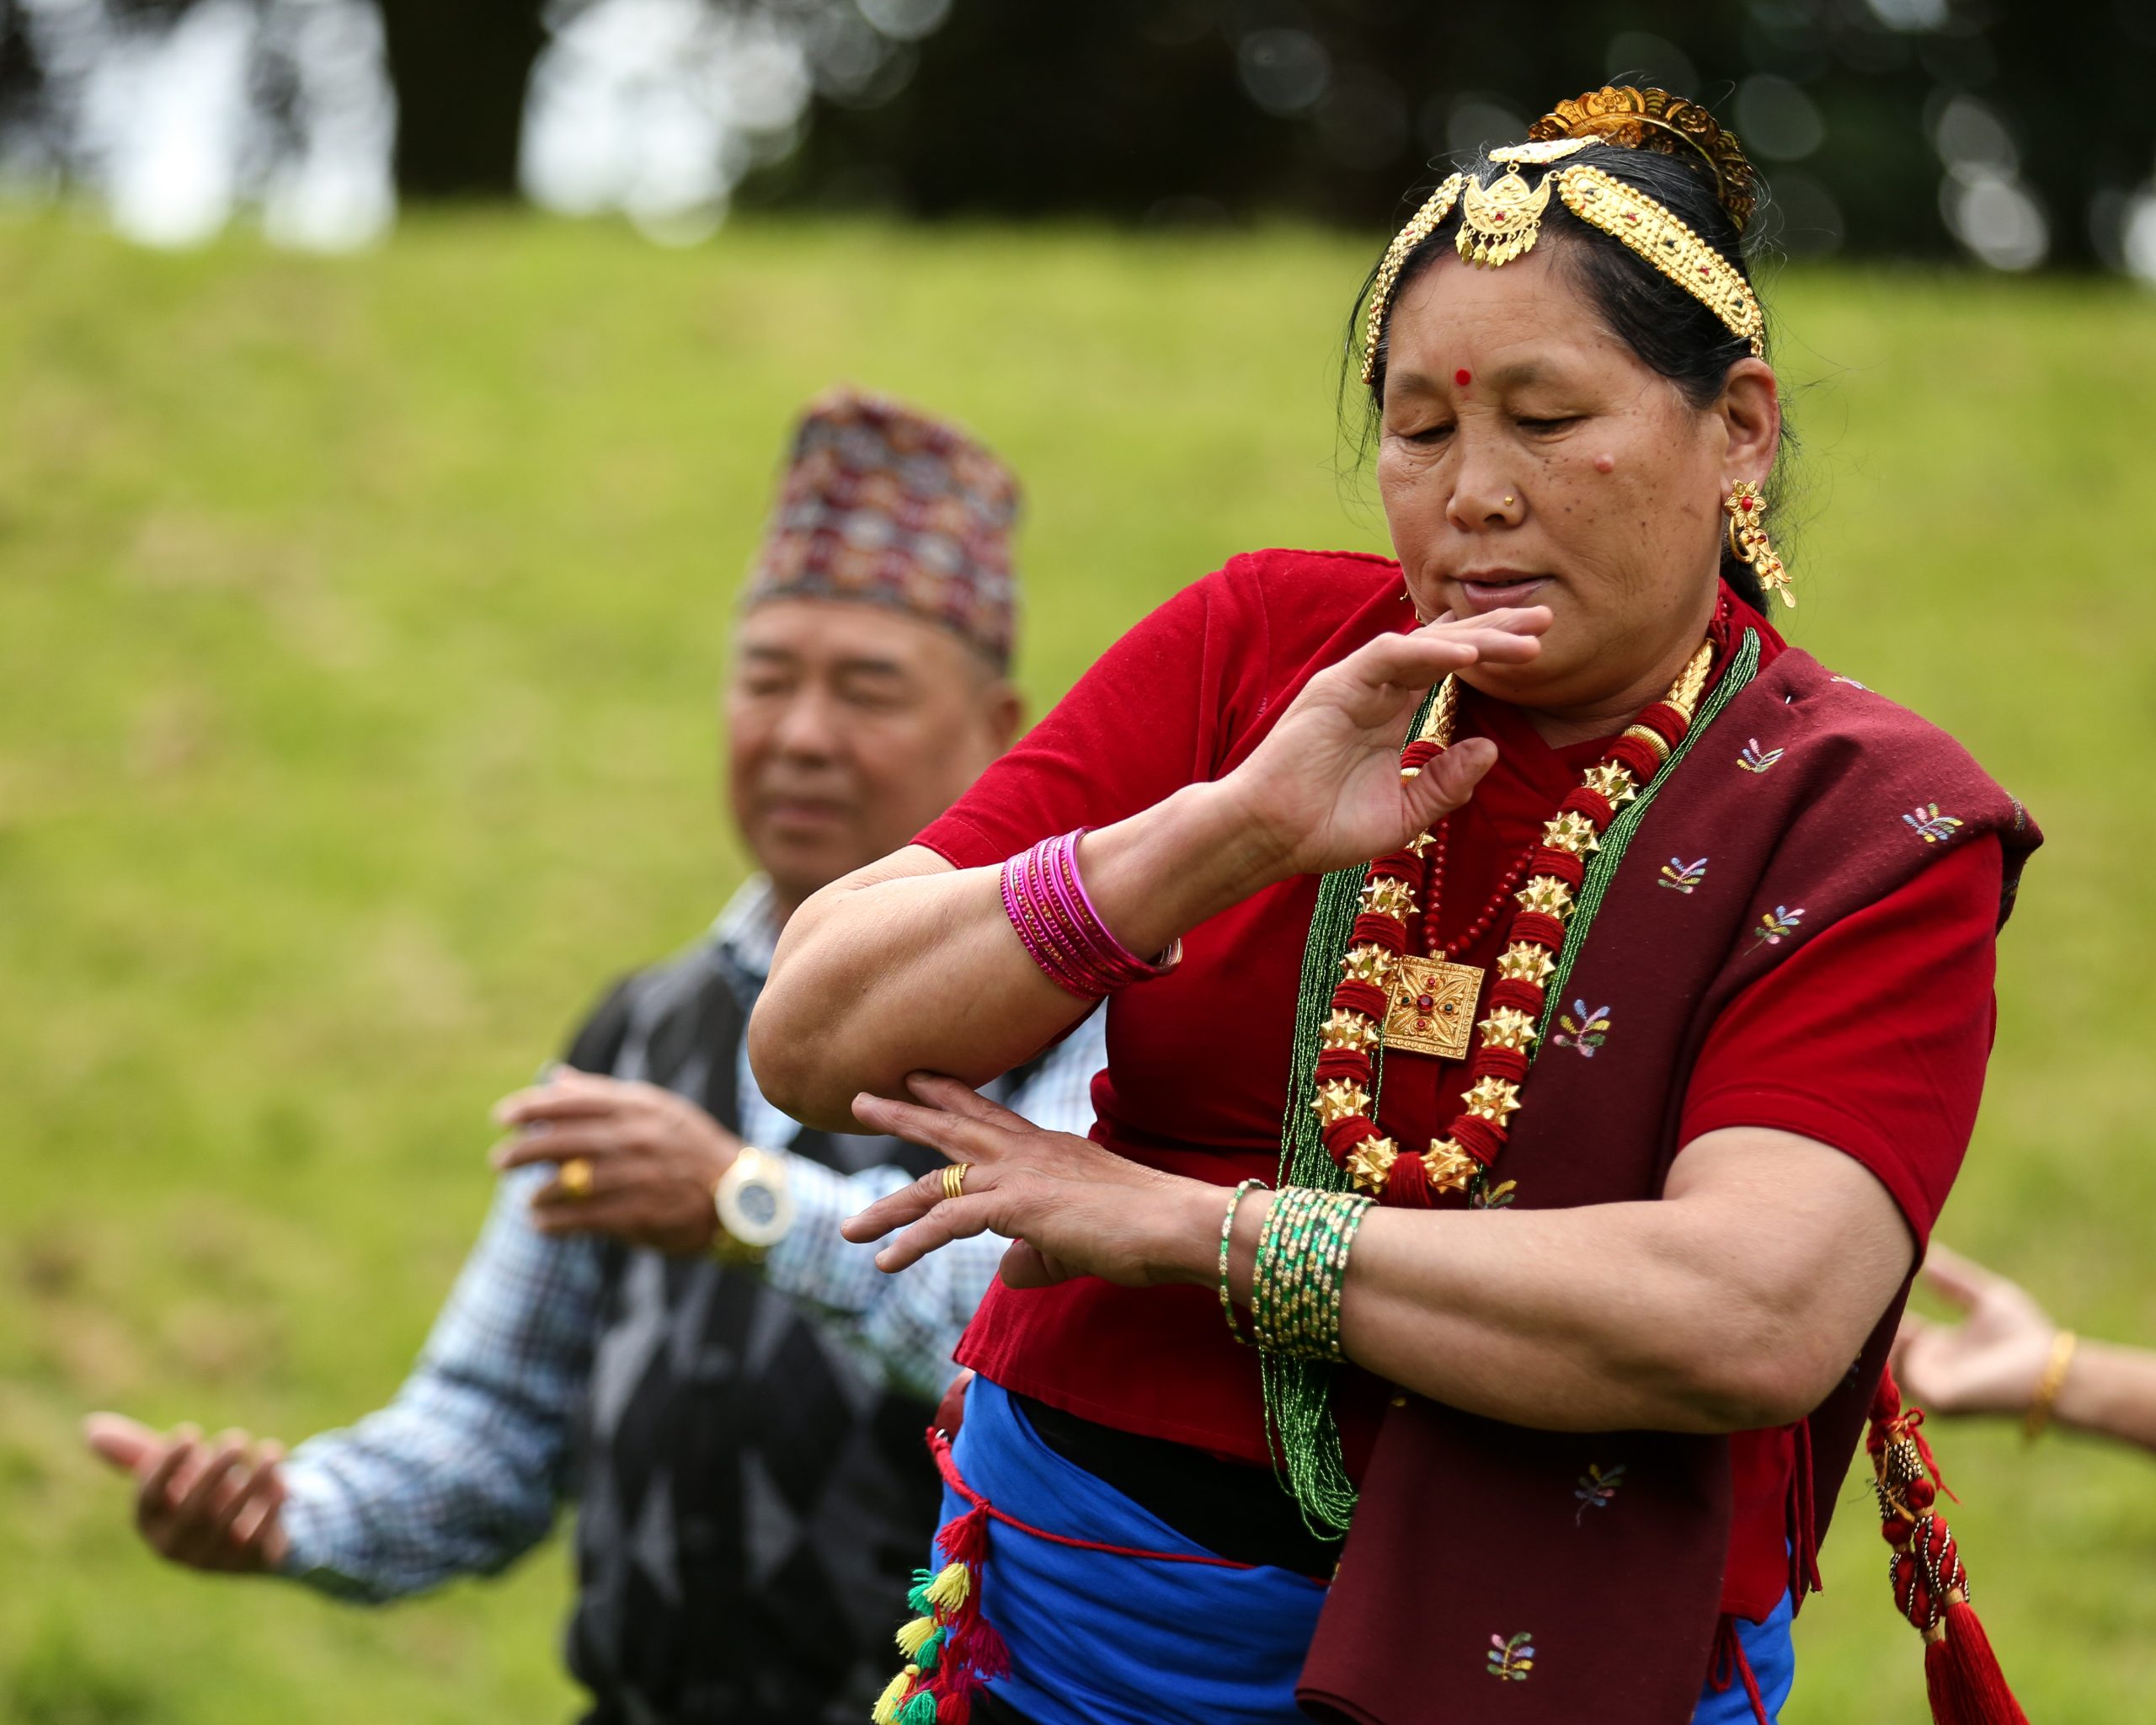 30 years in pictures: Greenwich World Cultural Festival. A Nepalese dancer in traditional dress performs outdoors